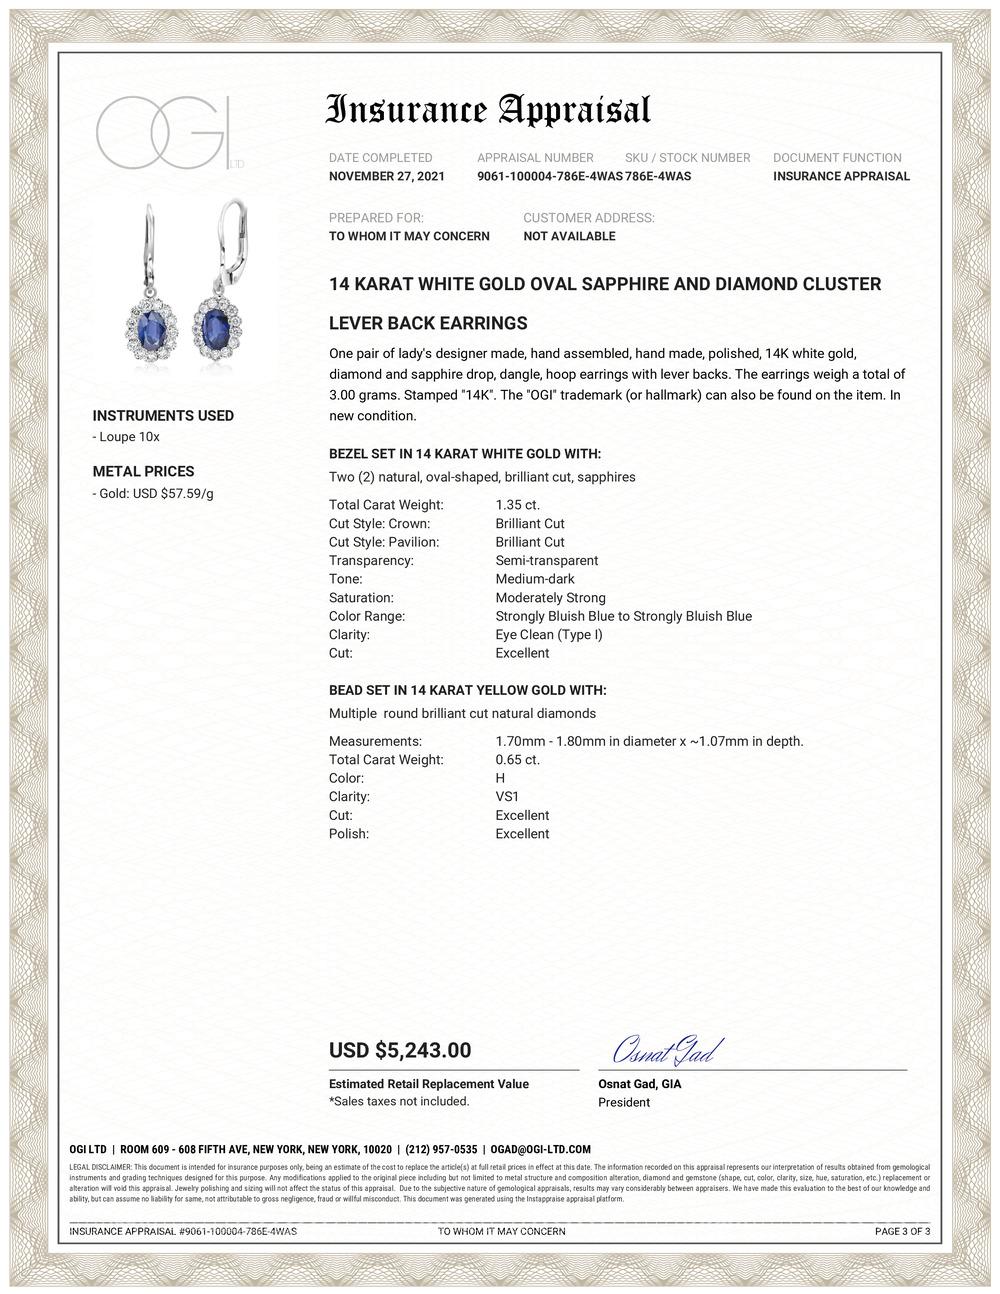 Fourteen karats white gold sapphire and diamond cluster lever back hoop earrings
Two oval shaped Ceylon sapphire weighing 1.35 carat
Sapphires are surrounded by diamonds weighing 0.65 carats
Earrings measuring 1.25 inch in length and 0.35 in width